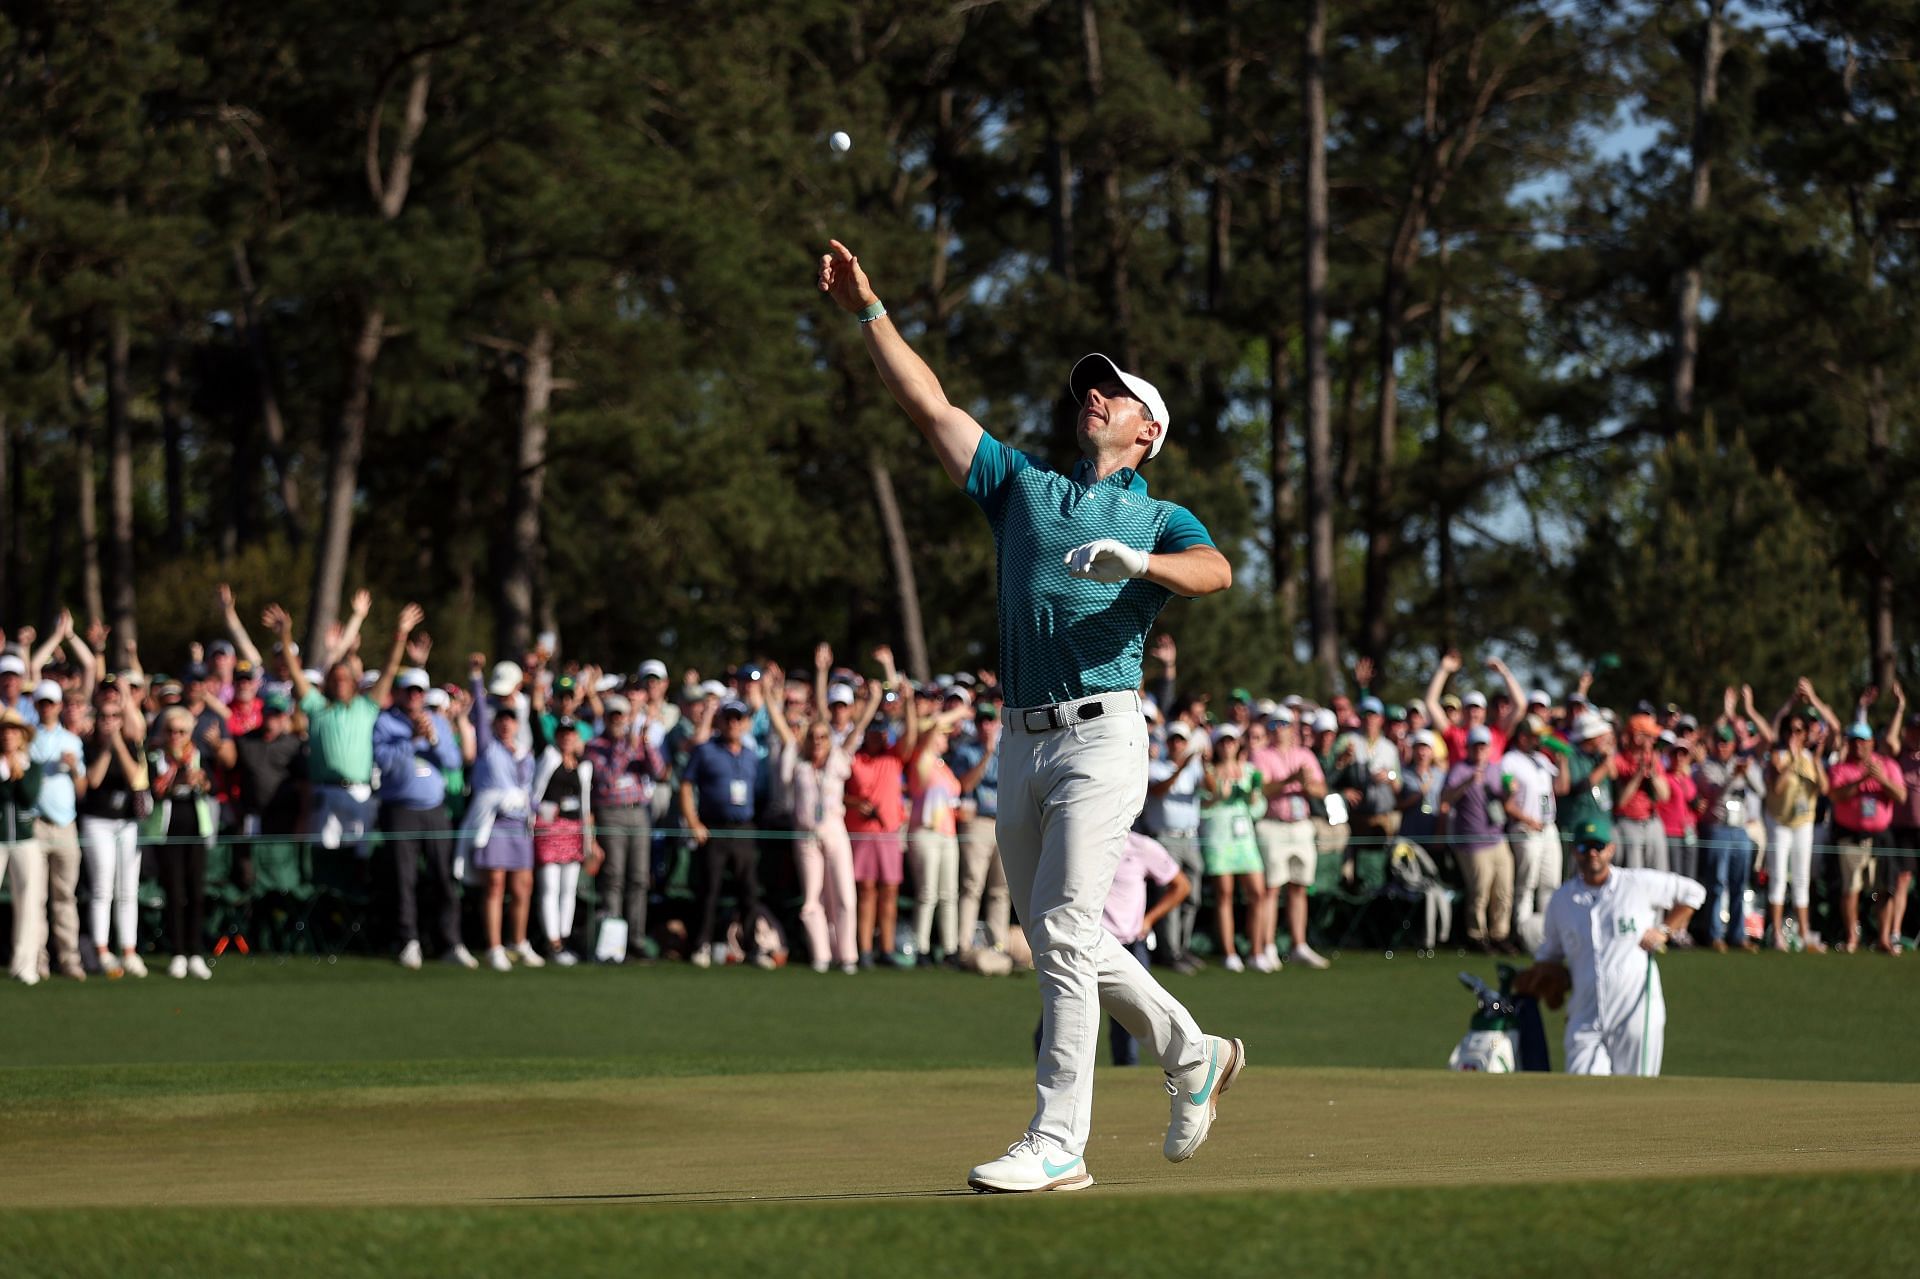 McIlroy at the 2022 Masters (via Getty Images)